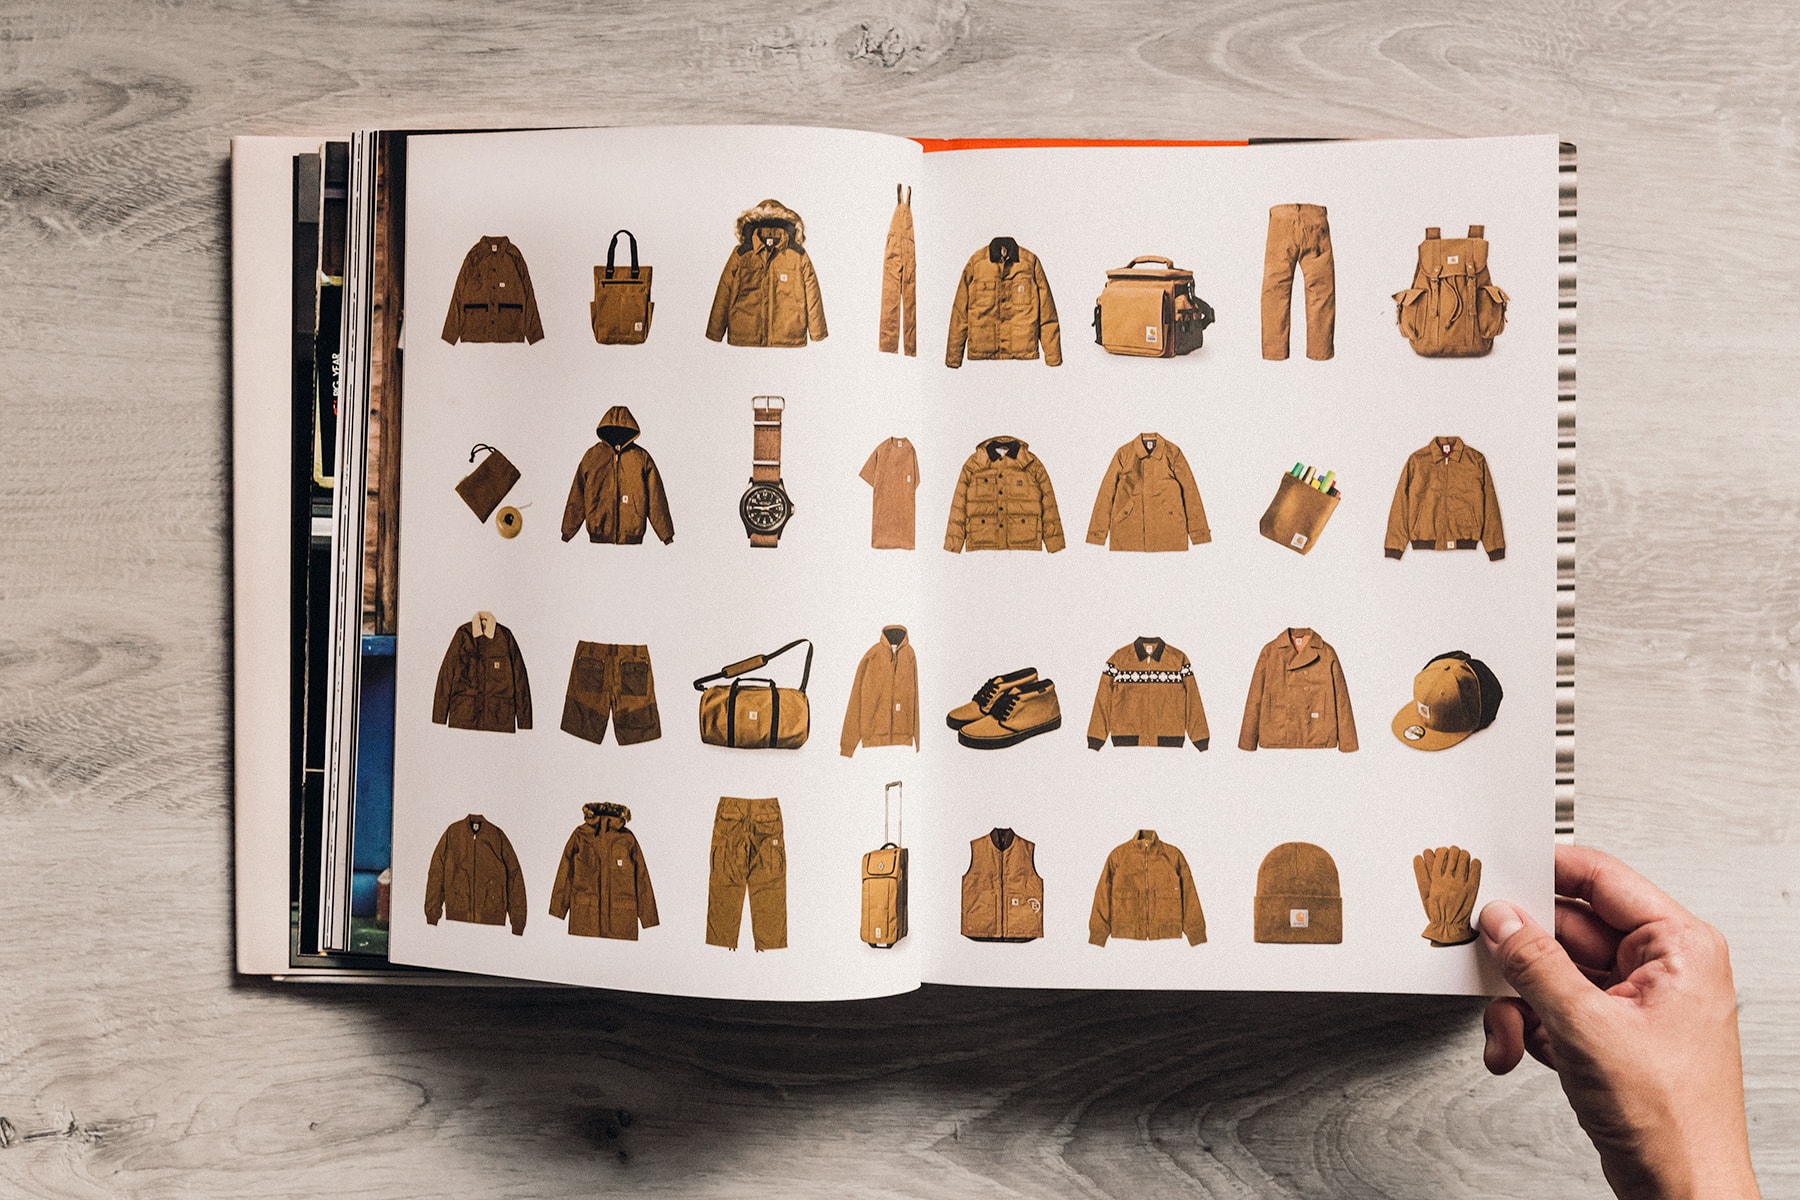 The Carhartt WIP Archives Rizzoli Book